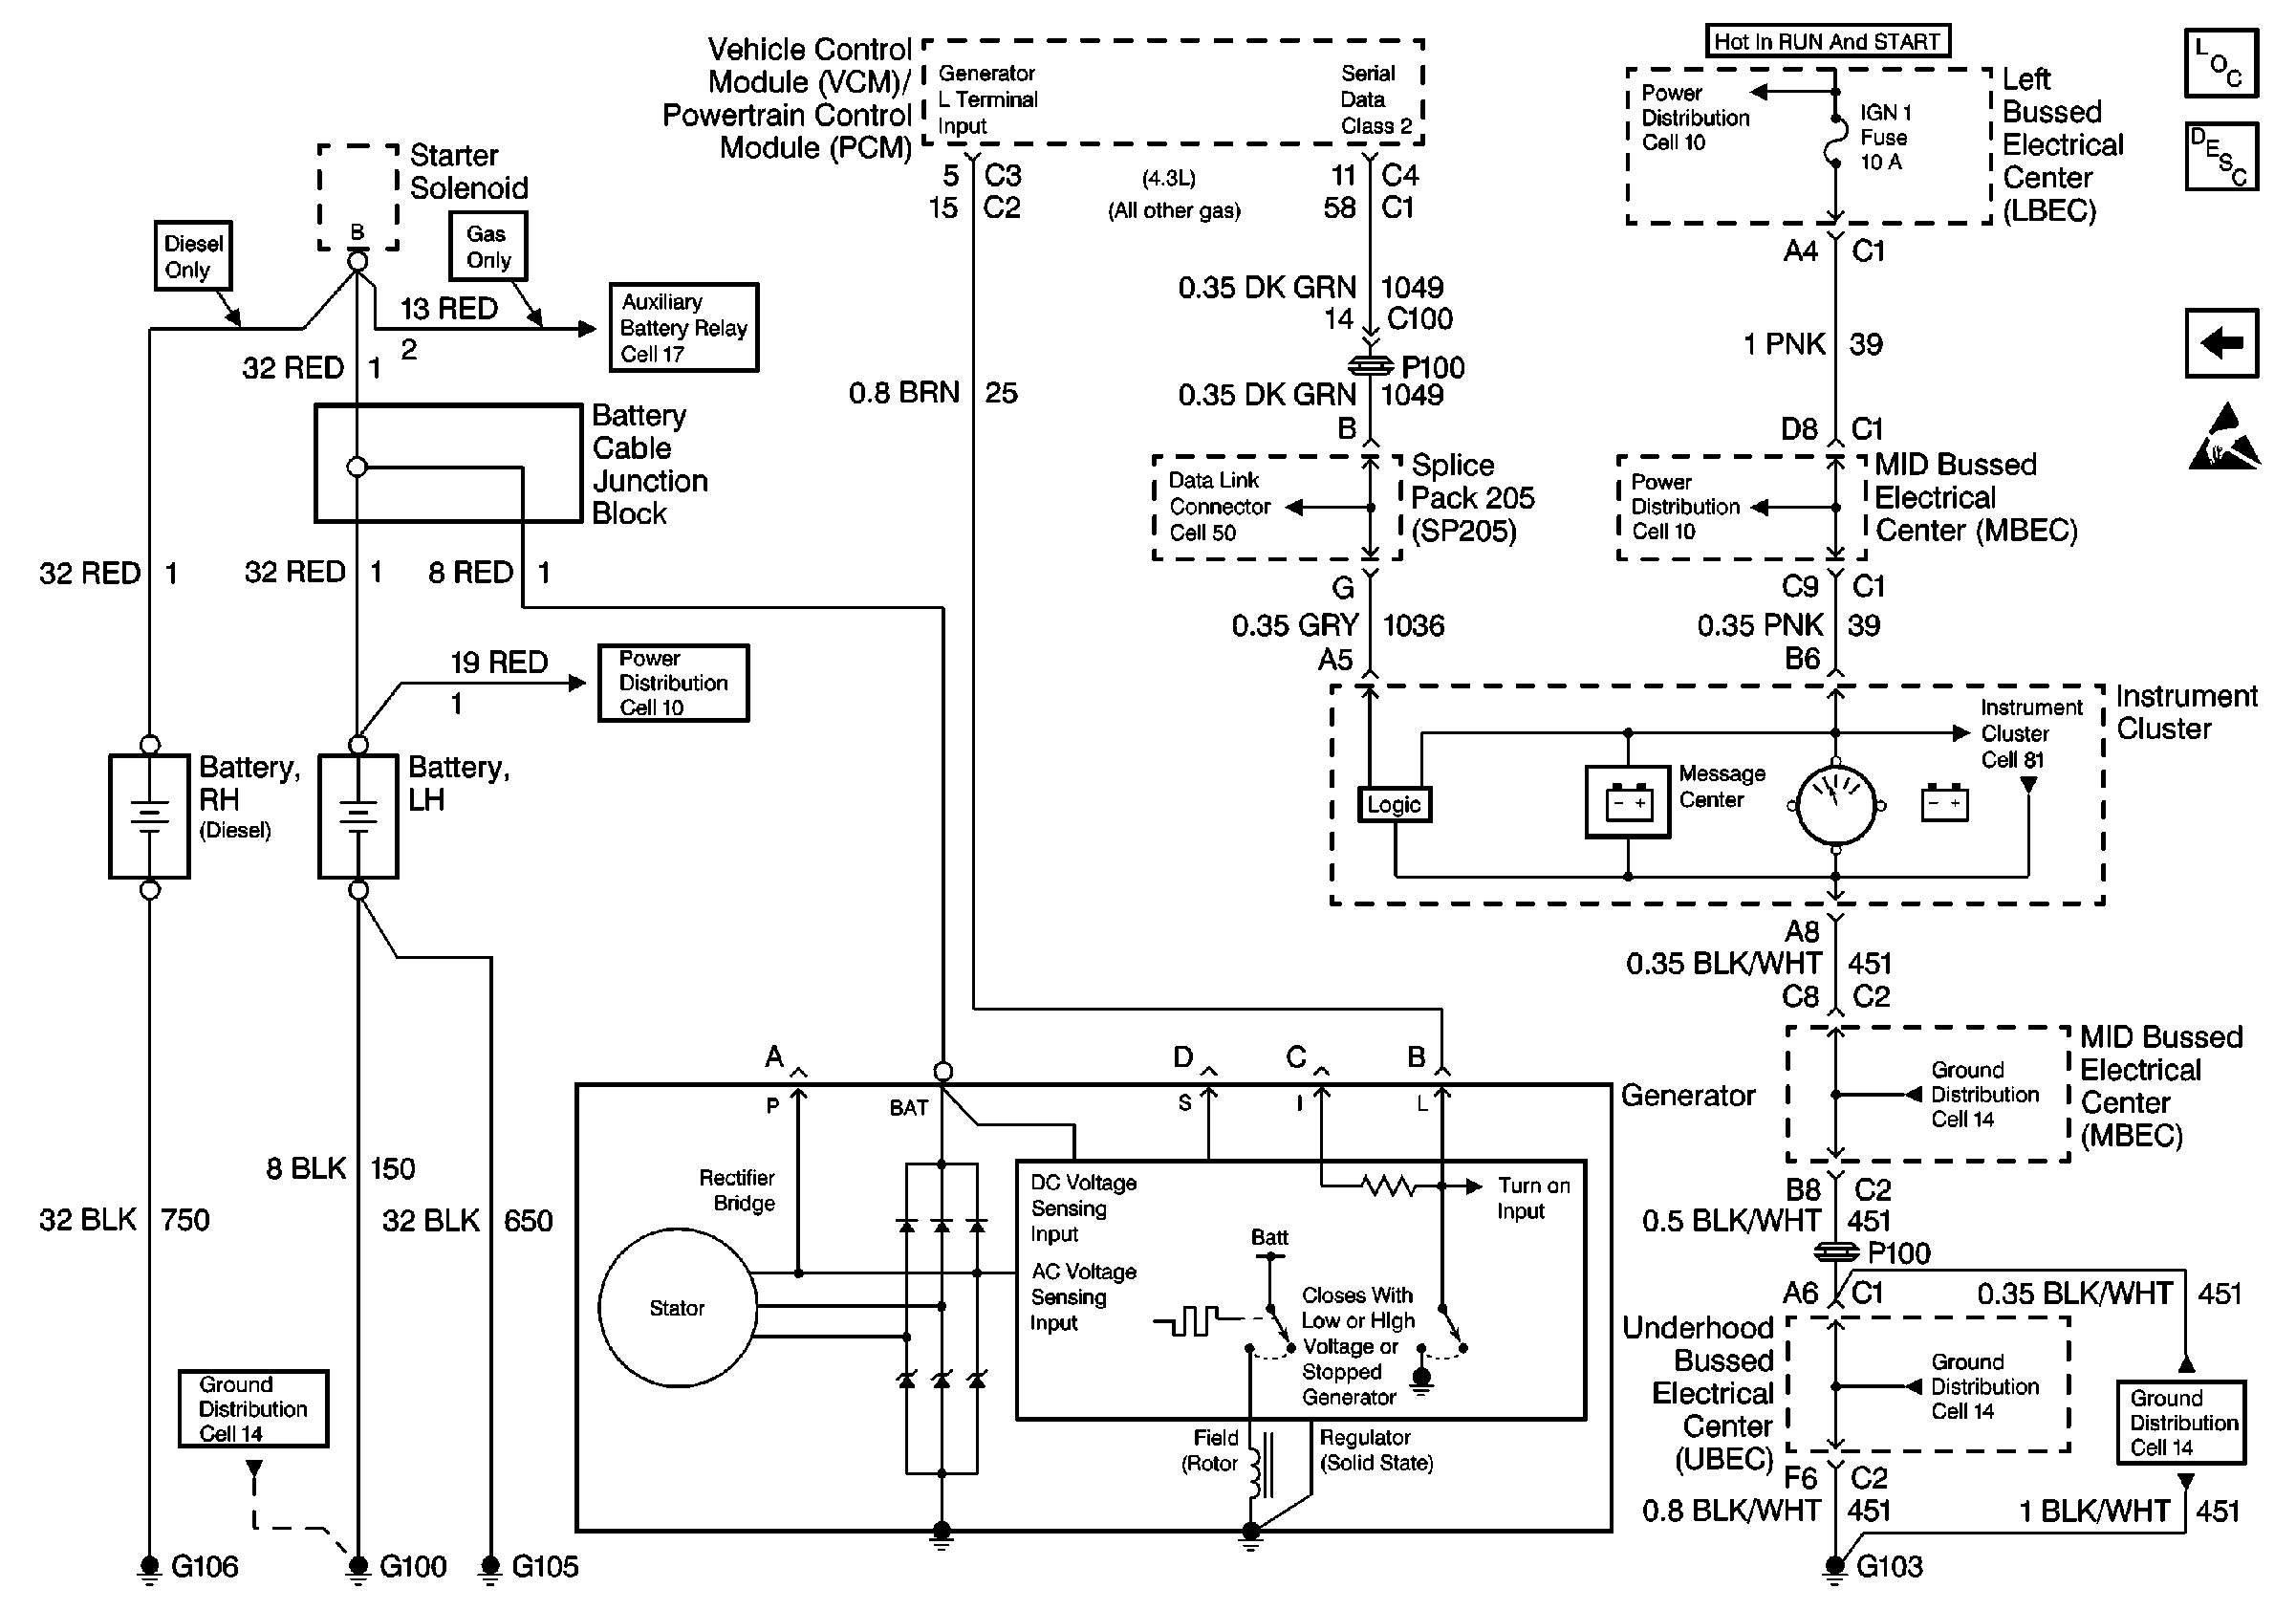 4 Wire Alternator Wiring Diagram Ford from ls1tech.com